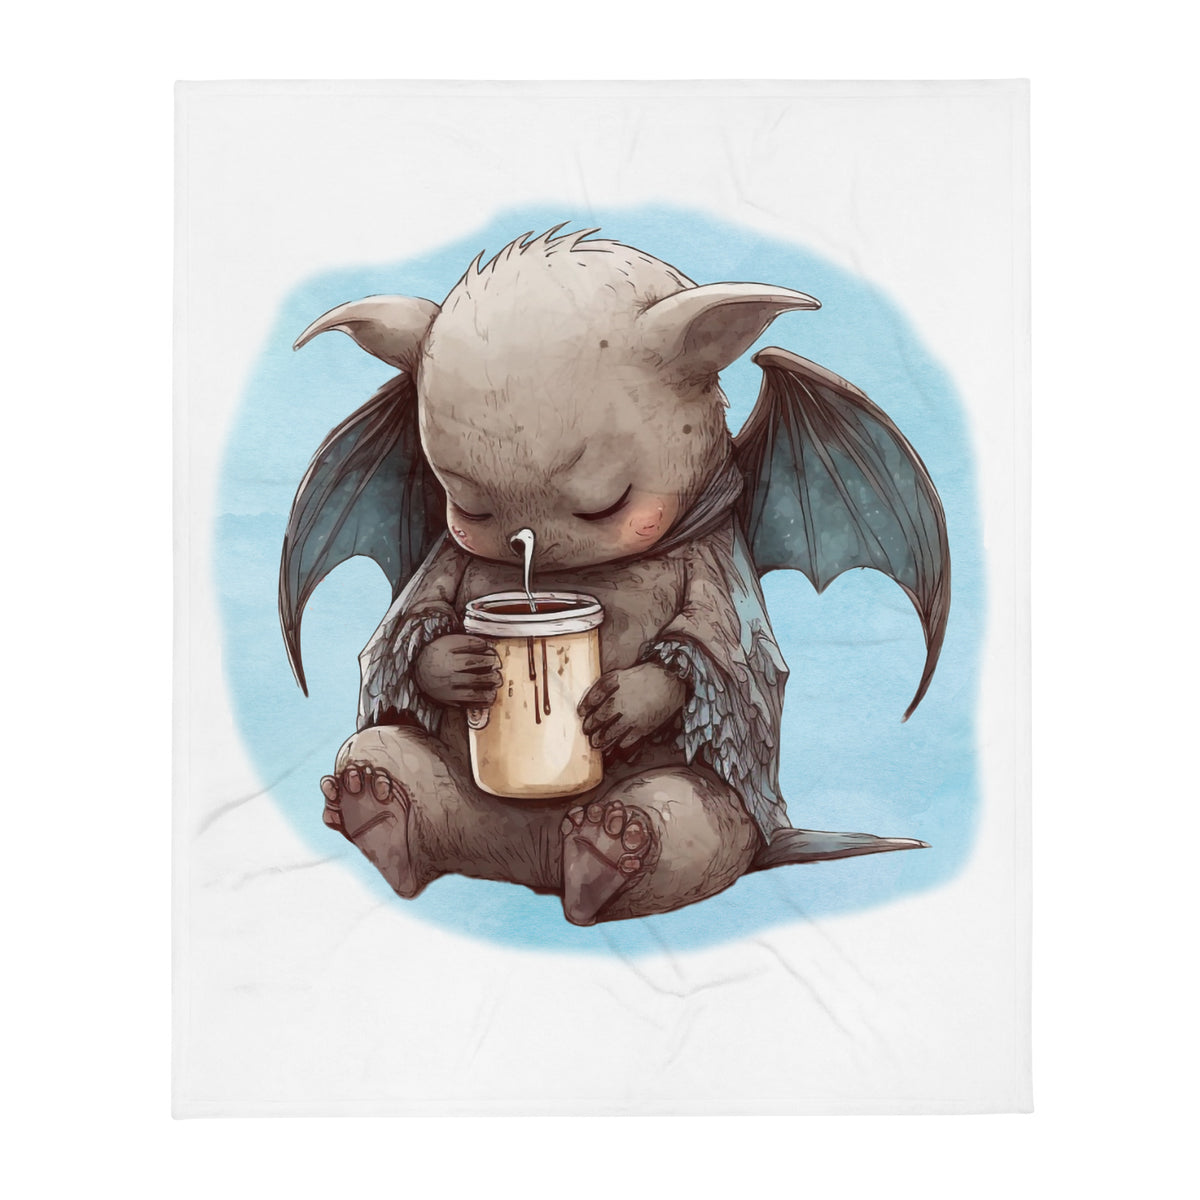 Sleepy Bat 100% Polyester Soft Silk Touch Fabric Throw Blanket - Cozy, Durable and Adorable